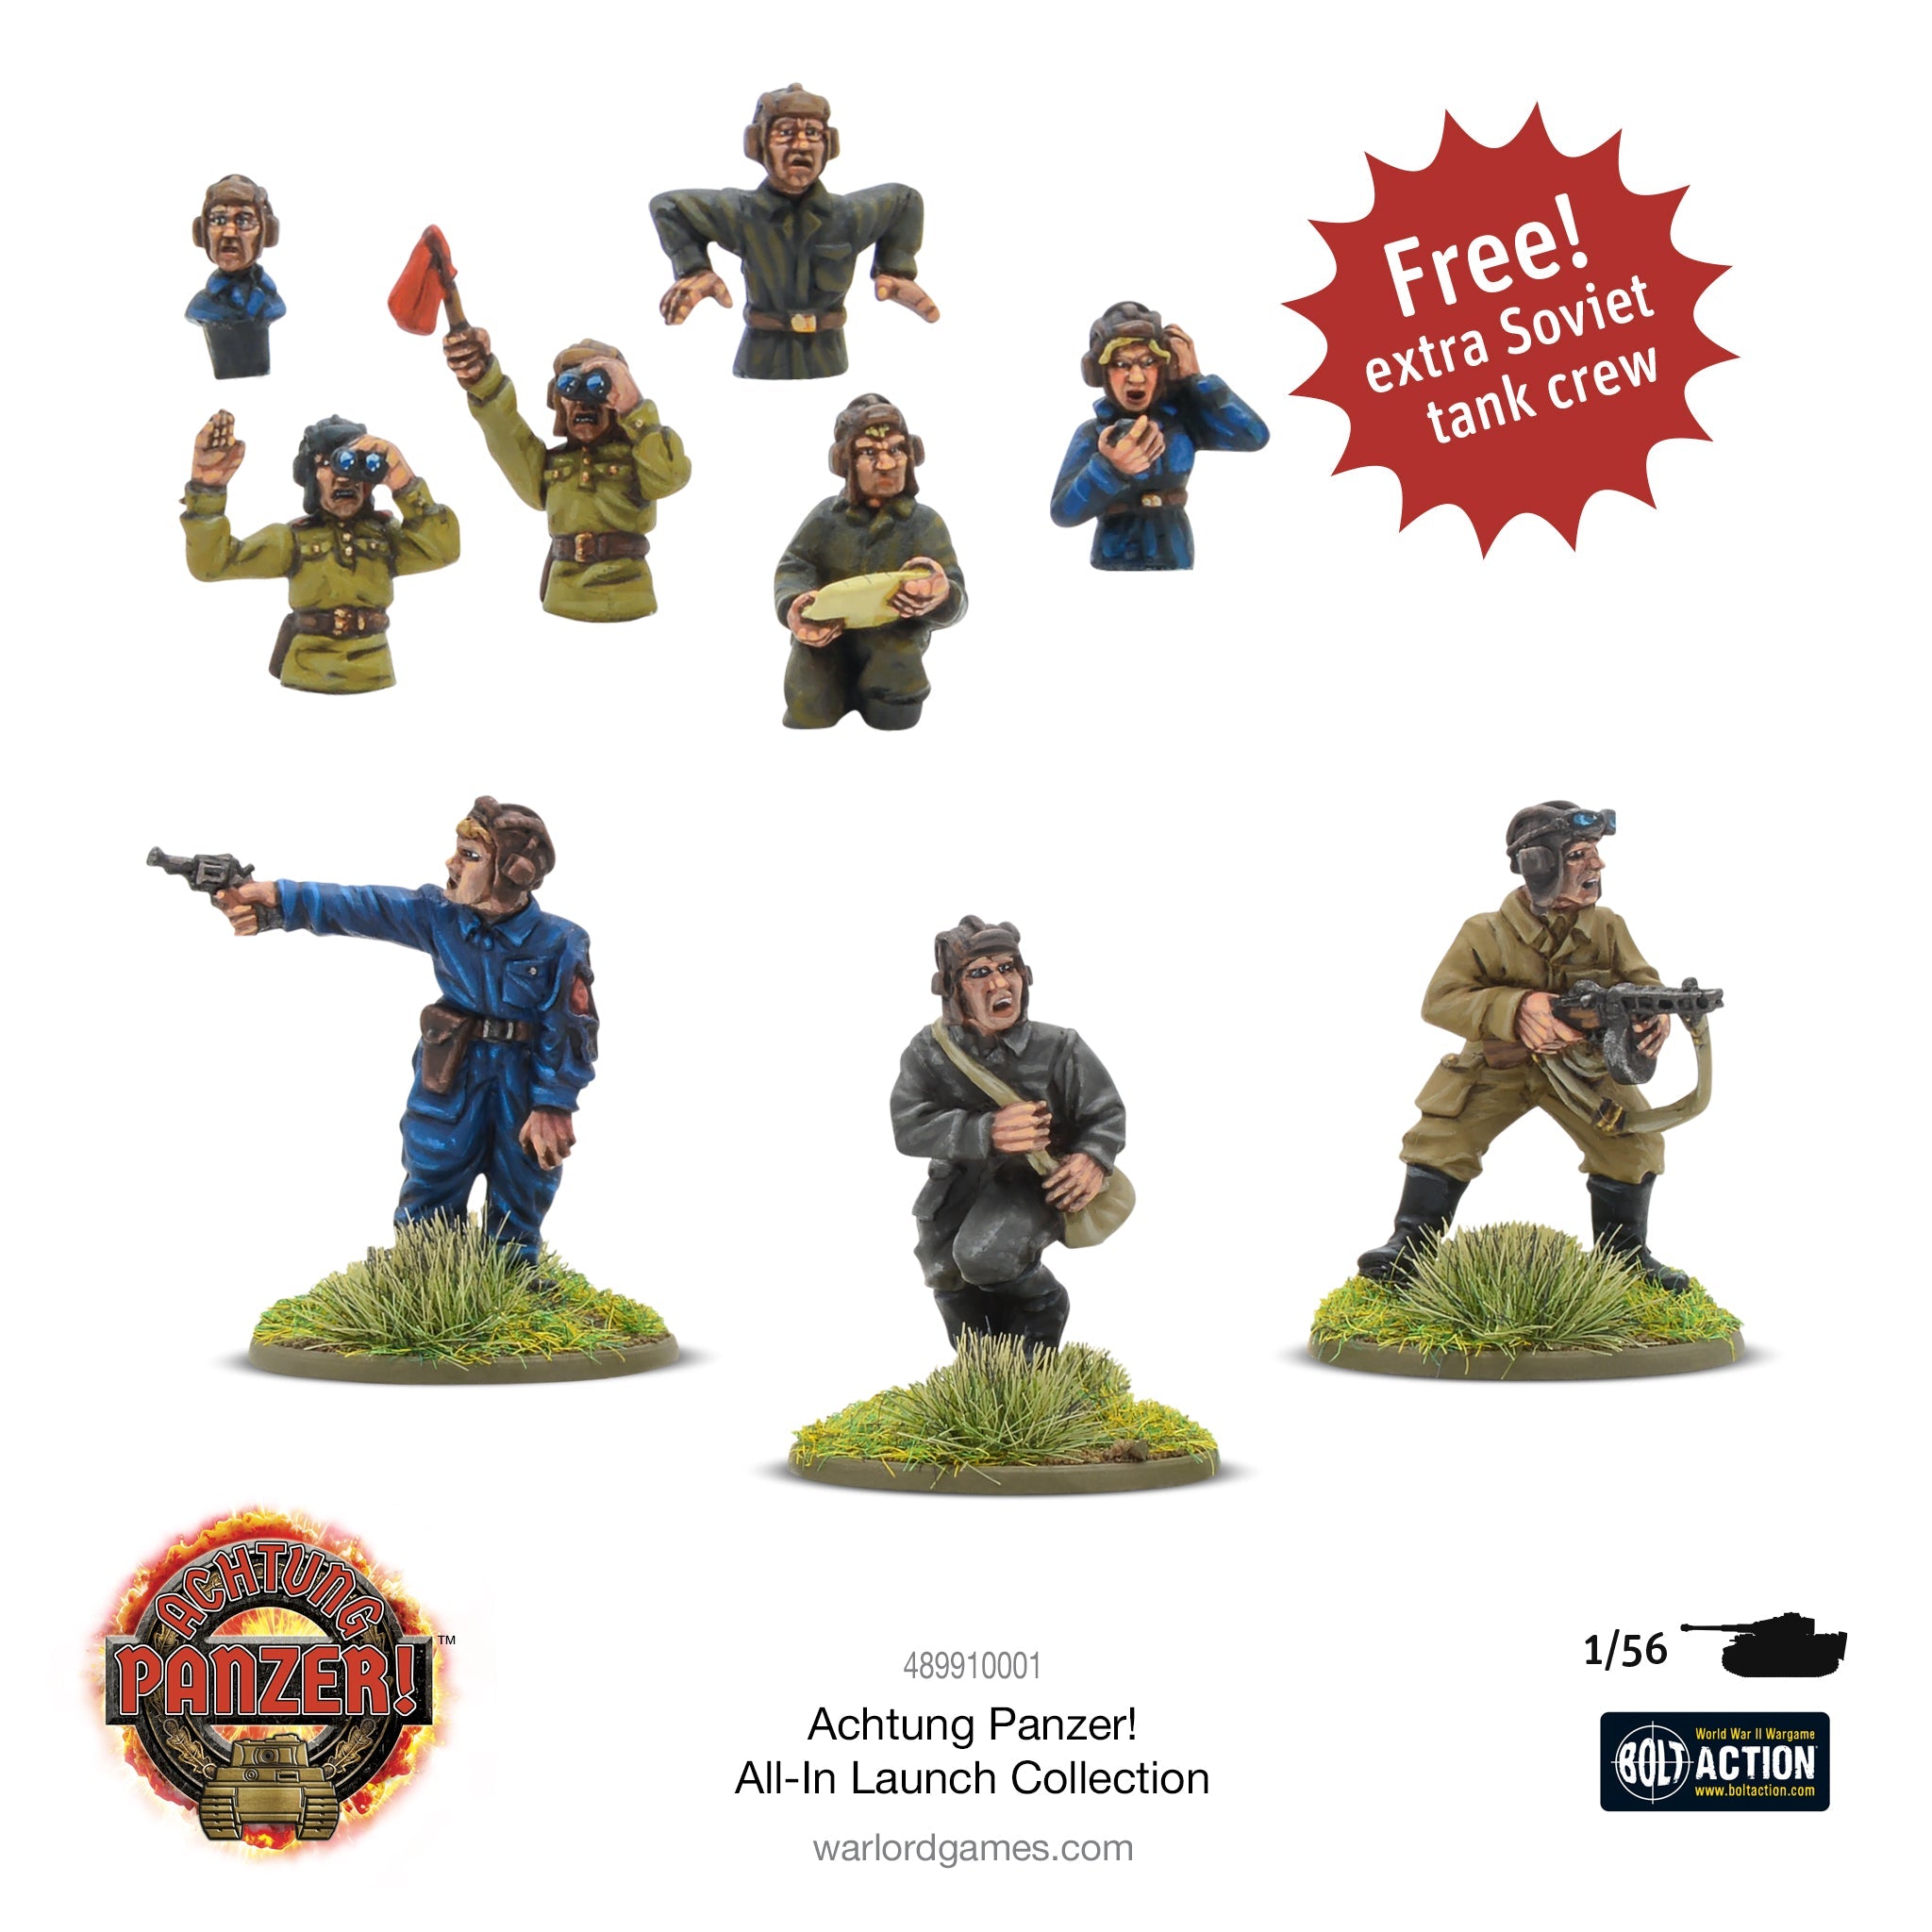 Achtung Panzer! All-In Launch Collection